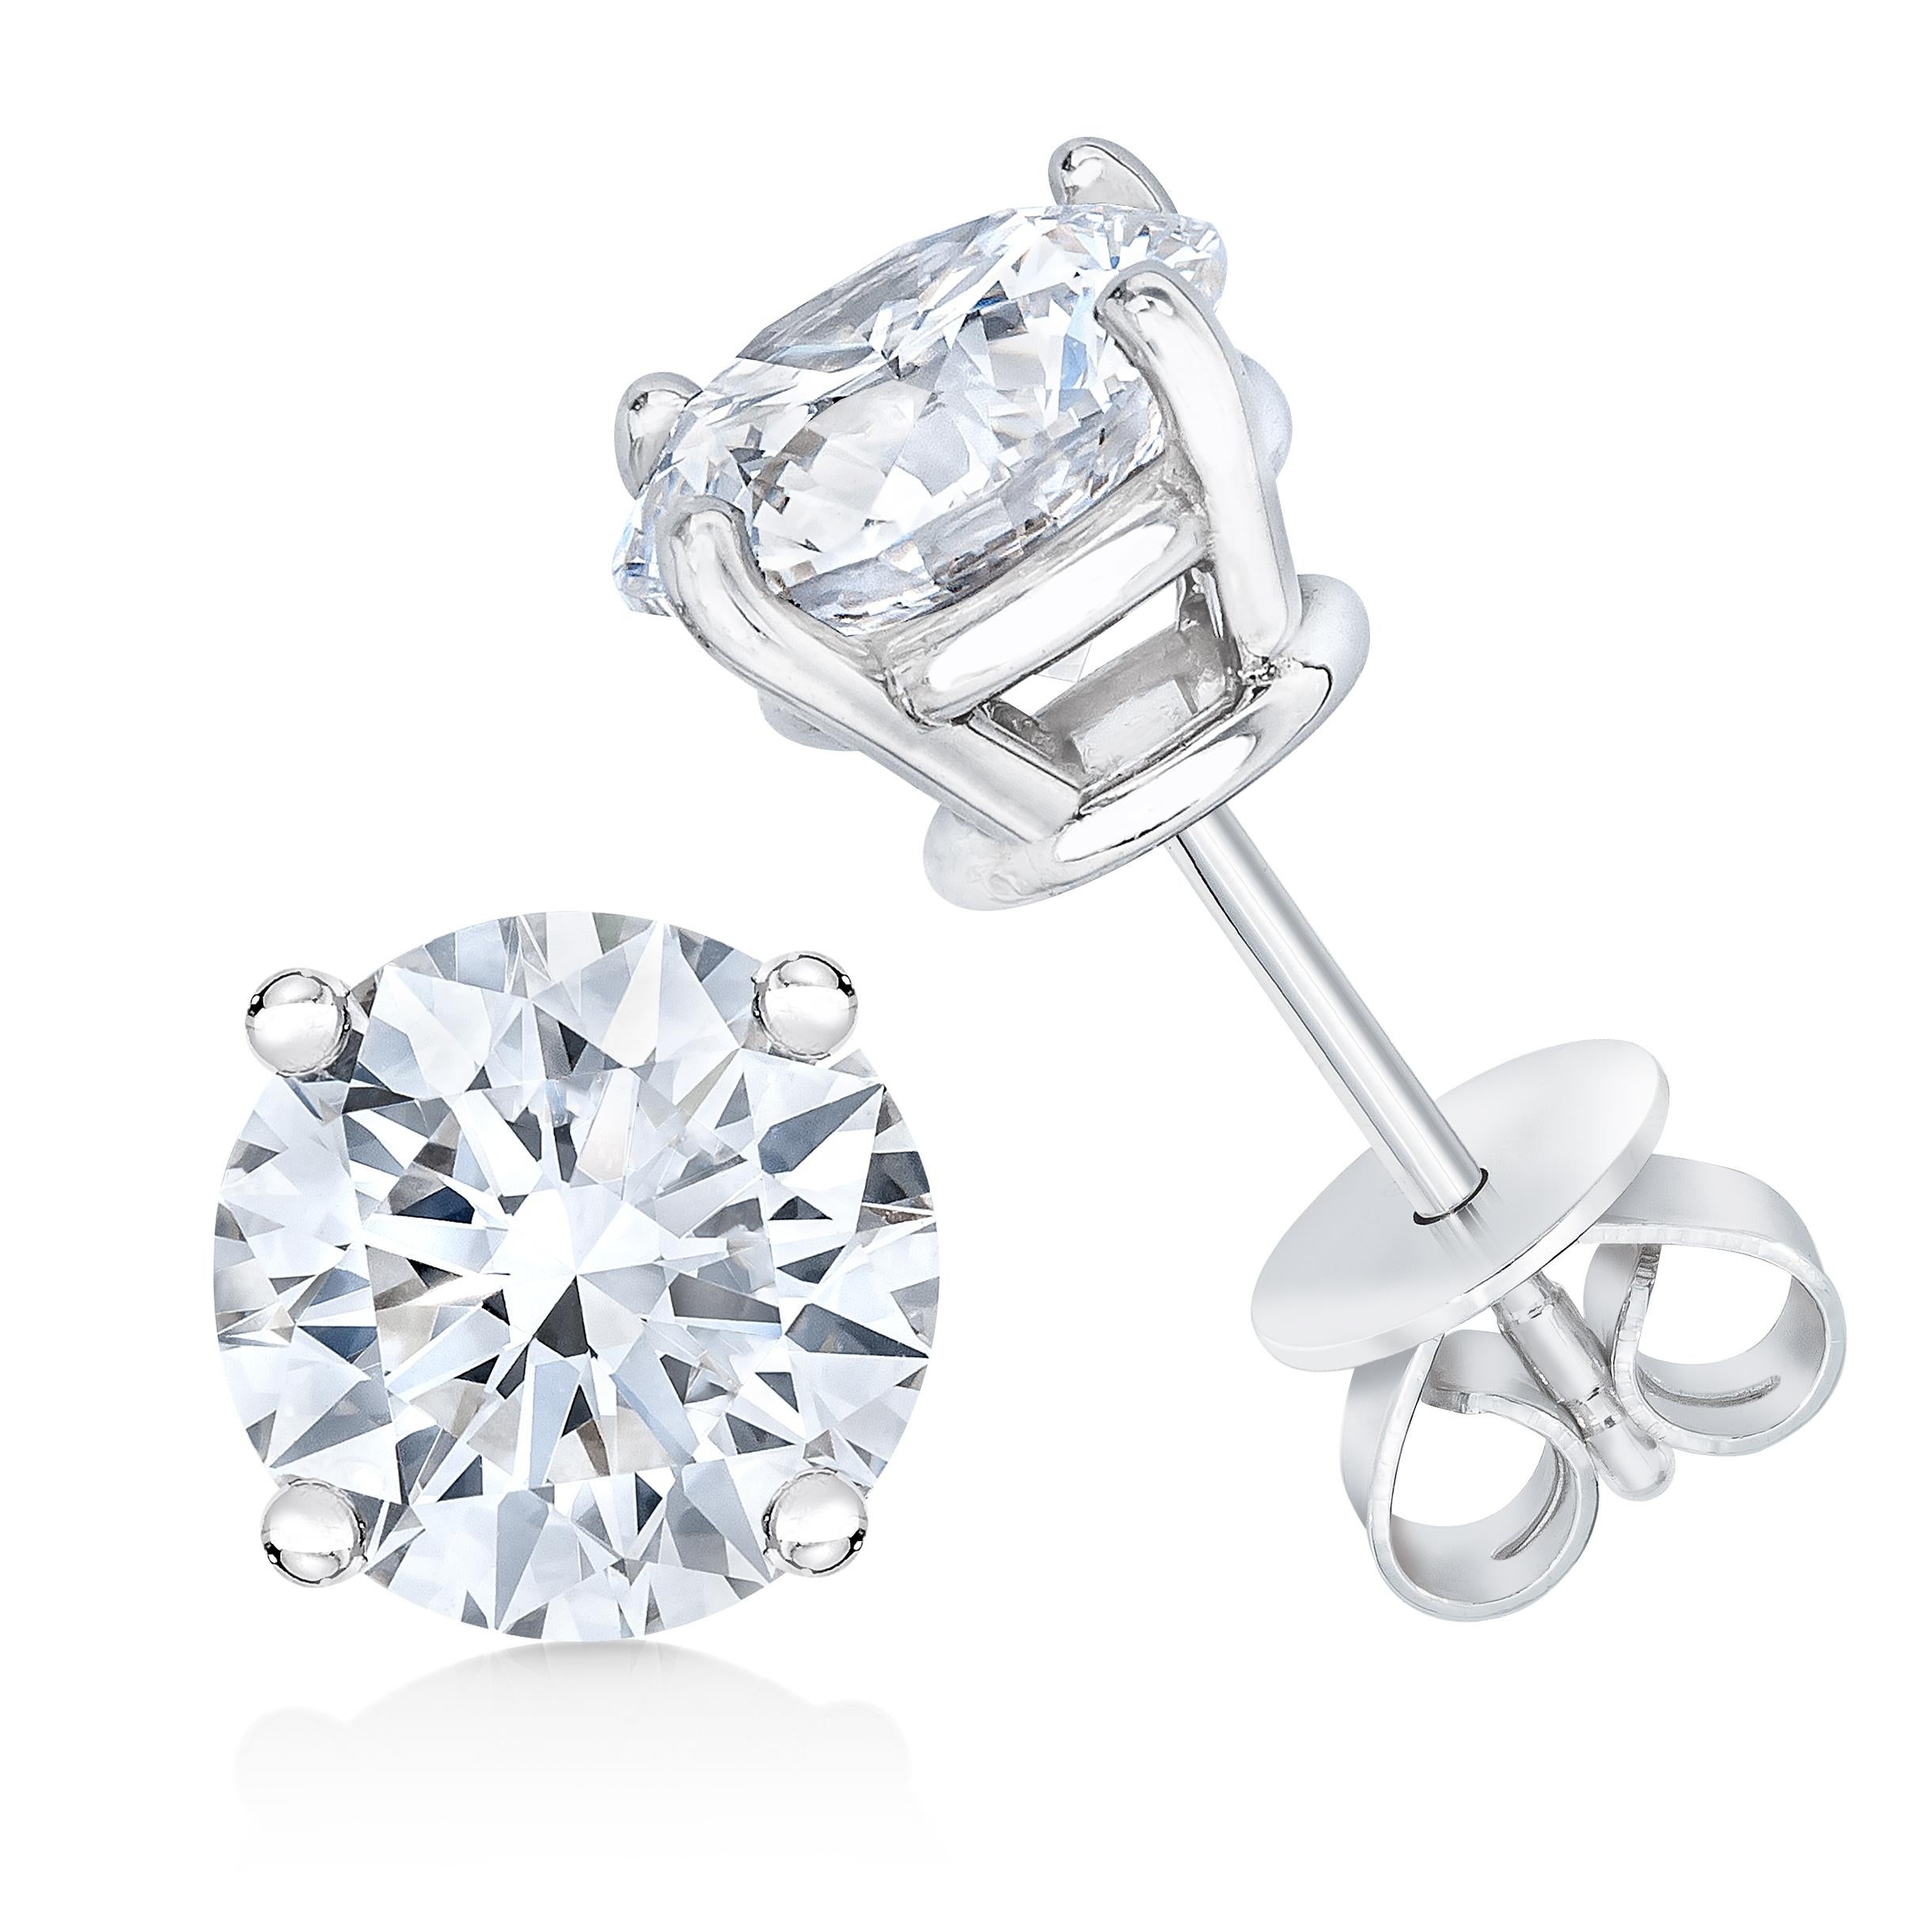 Celebrate any occasion with these classic shimmering diamond stud earrings. Crafted from 14k white gold each earring showcases a sparkling round-cut solitaire diamond in a 4-Prong Setting. Dazzling with 1.0 cttw of diamonds and a bright polished